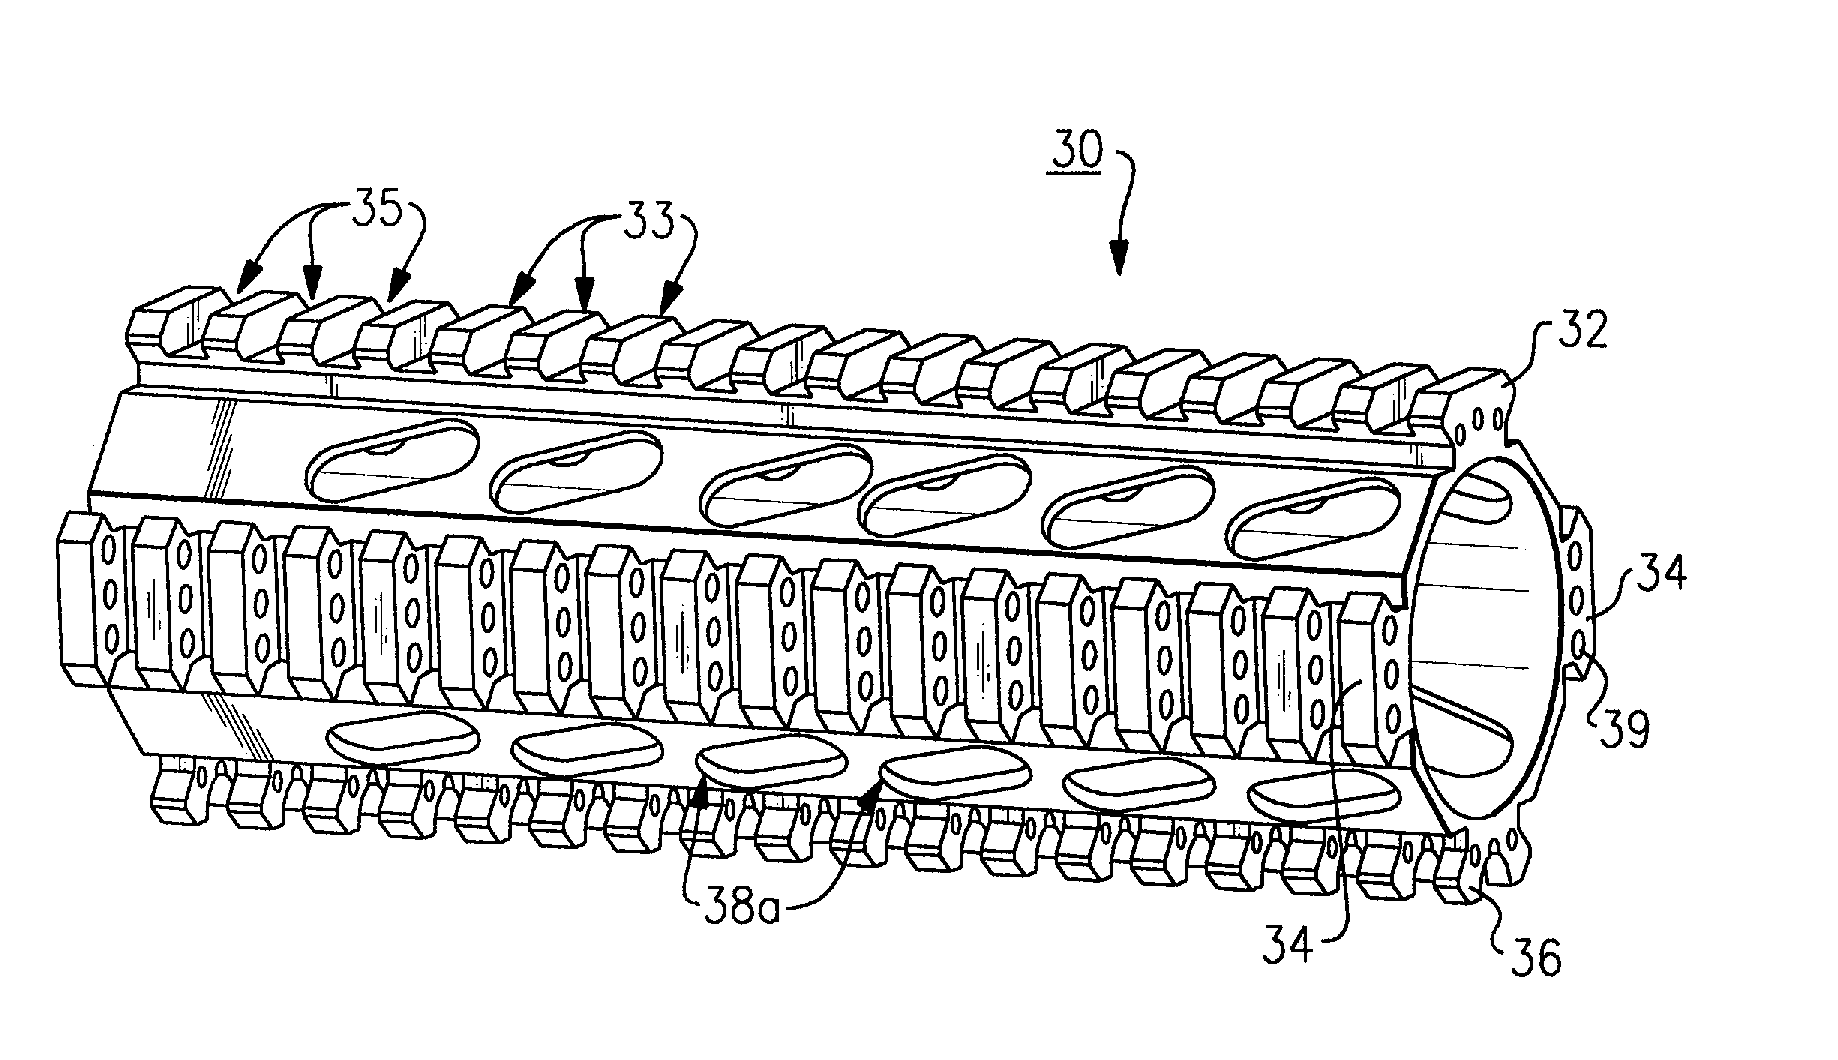 Integrated rail system and method for making and using same